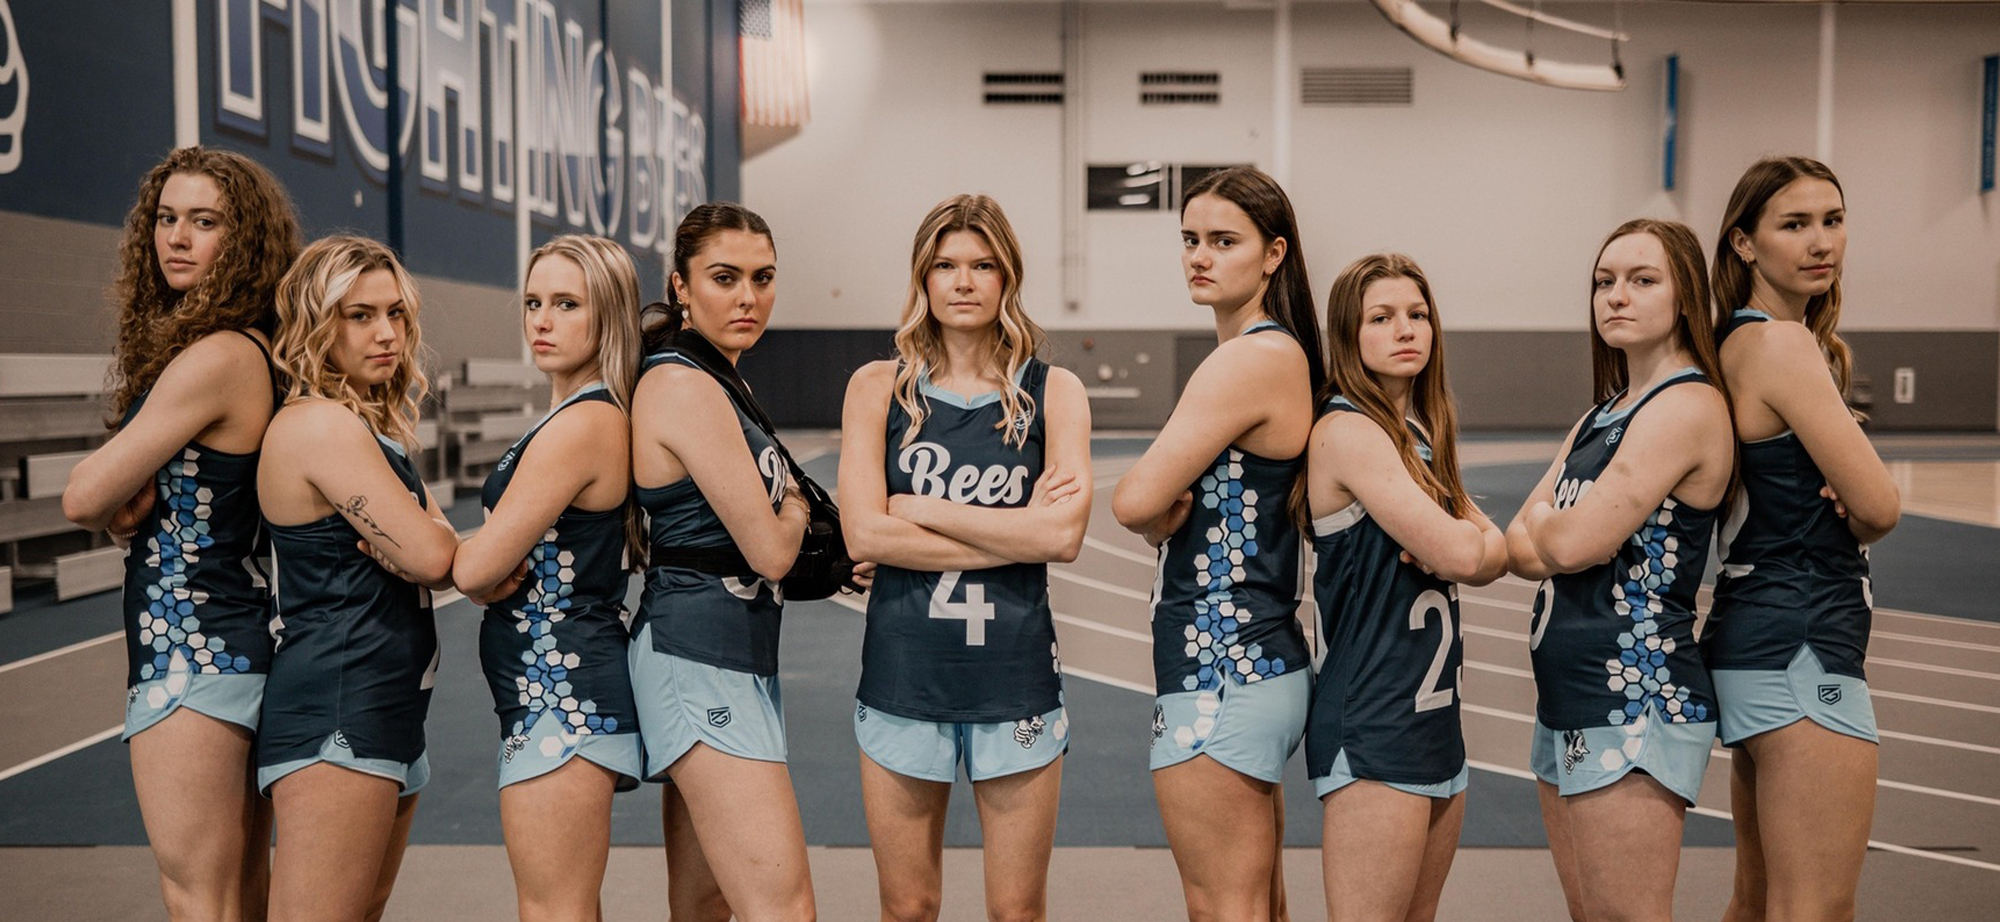 Women's Track and Field Pose